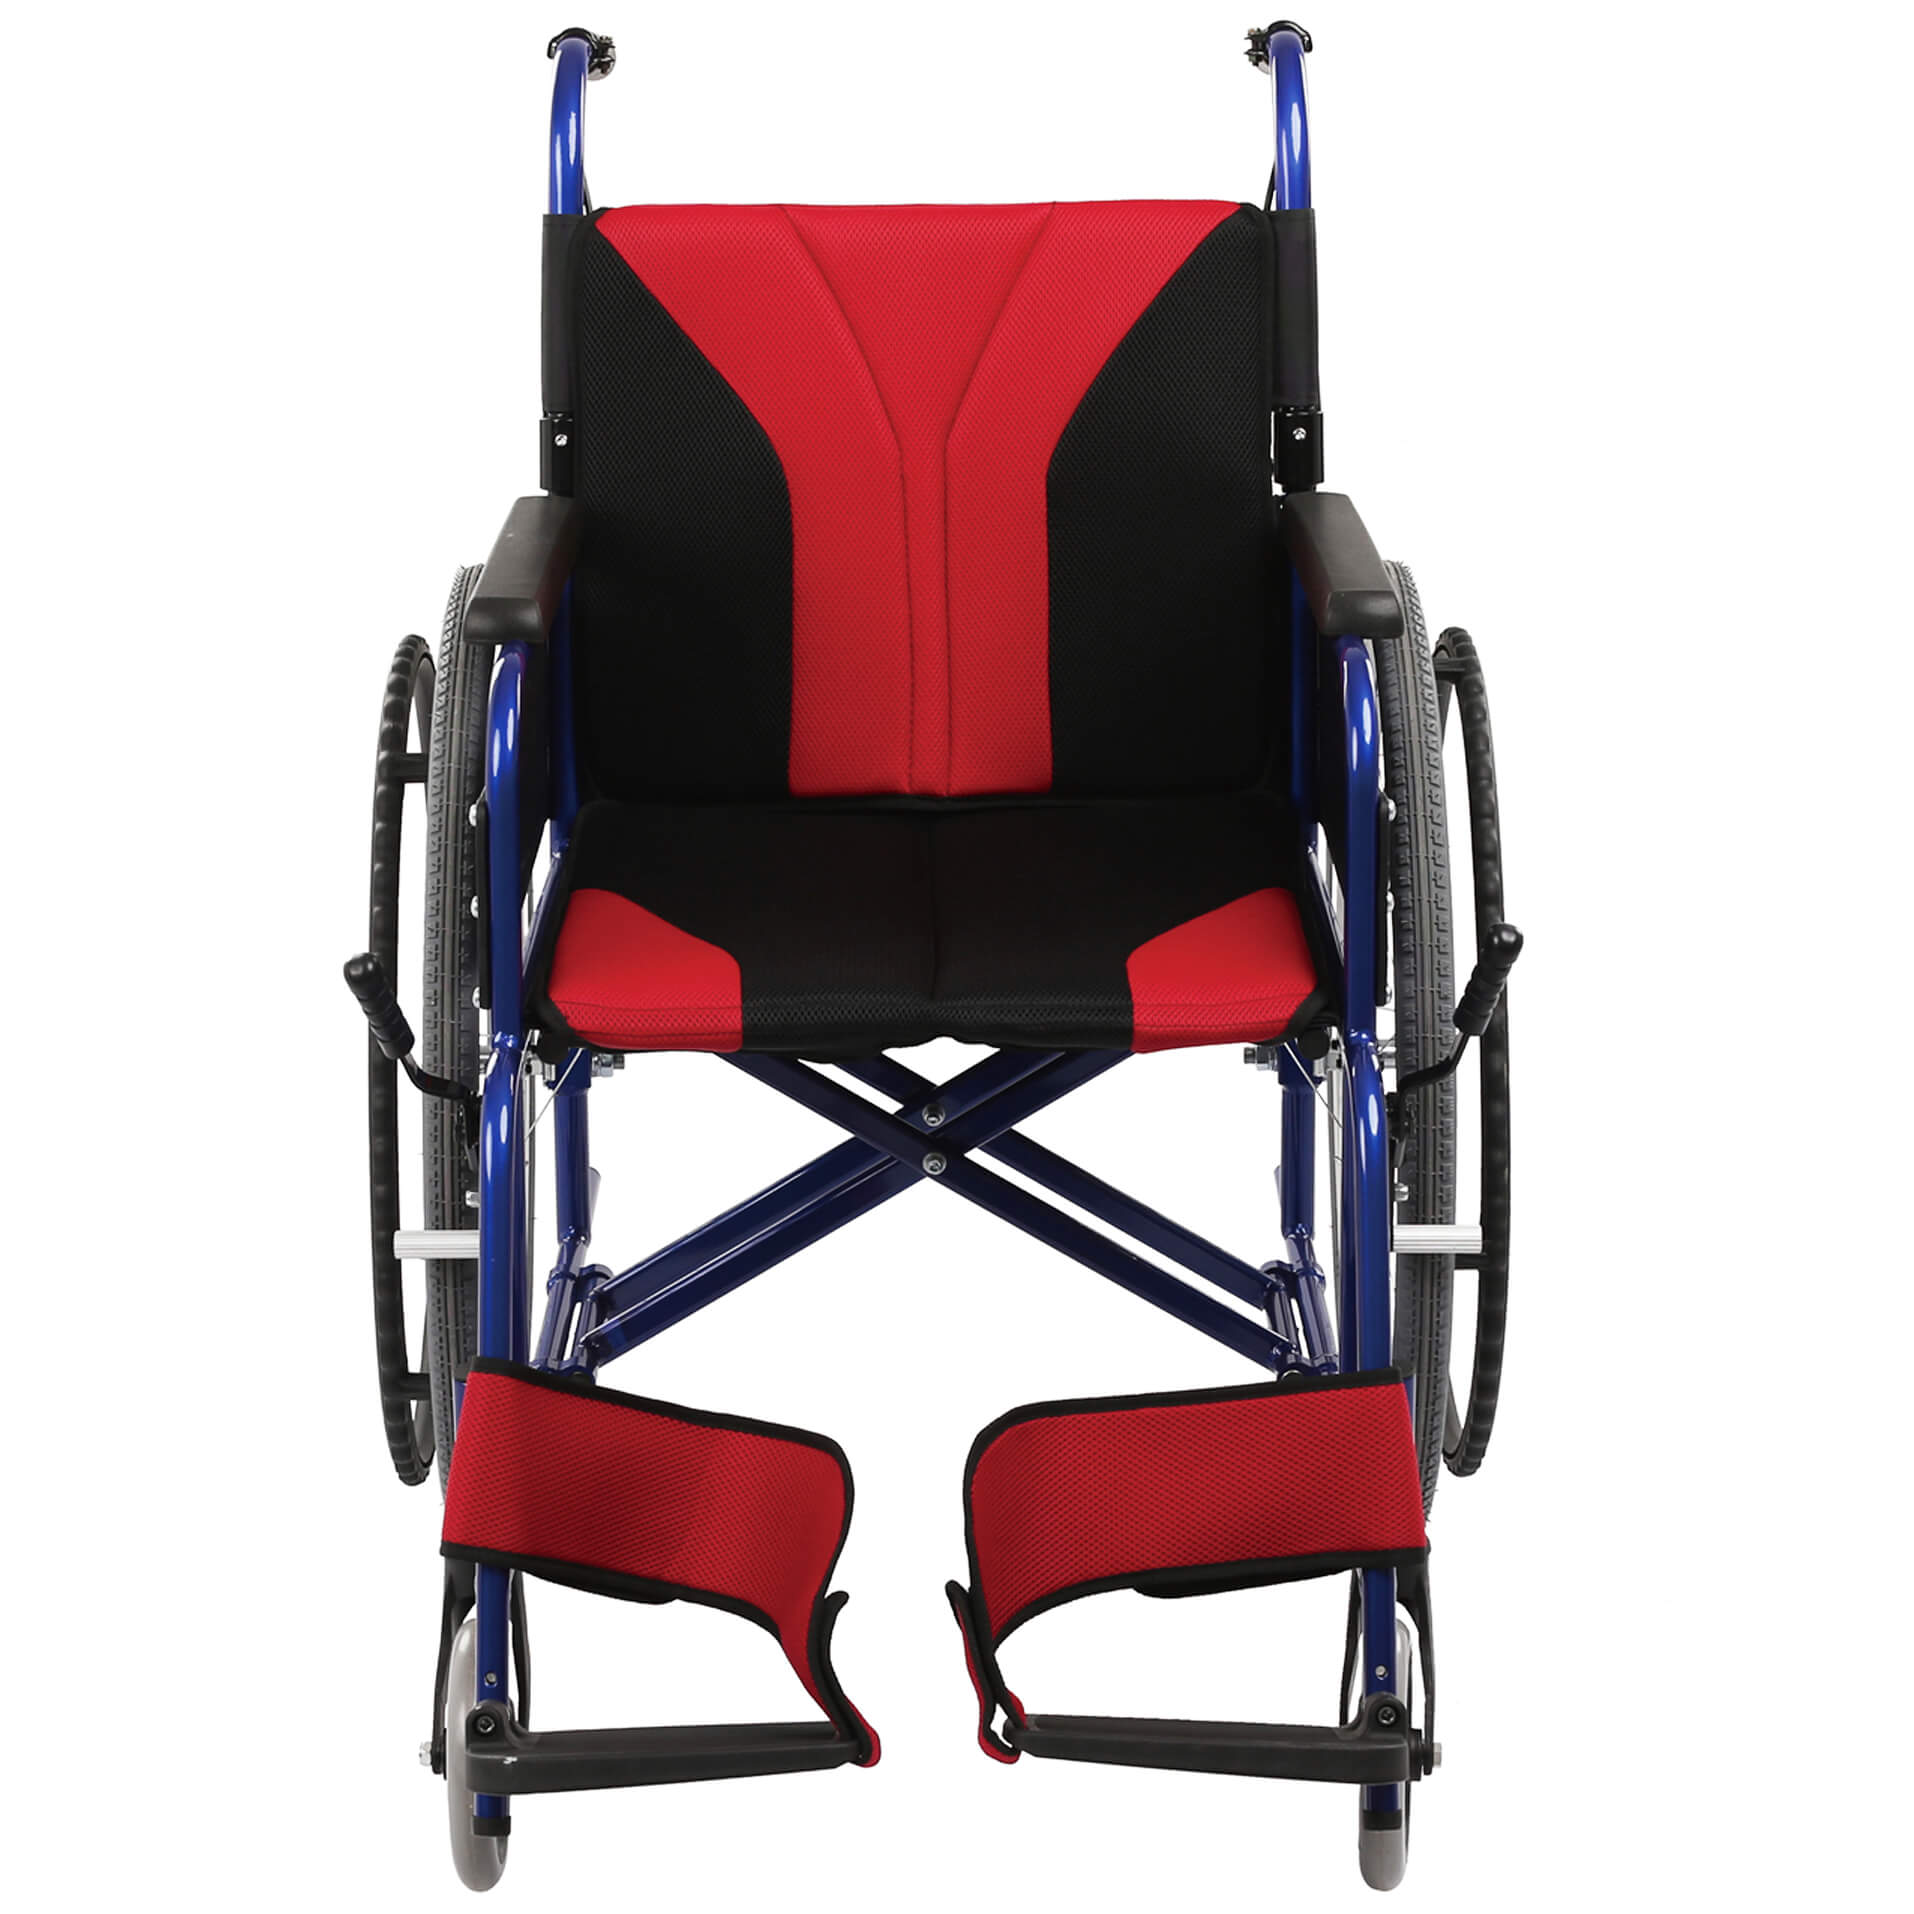 What are the common types of wheelchairs and the differences between